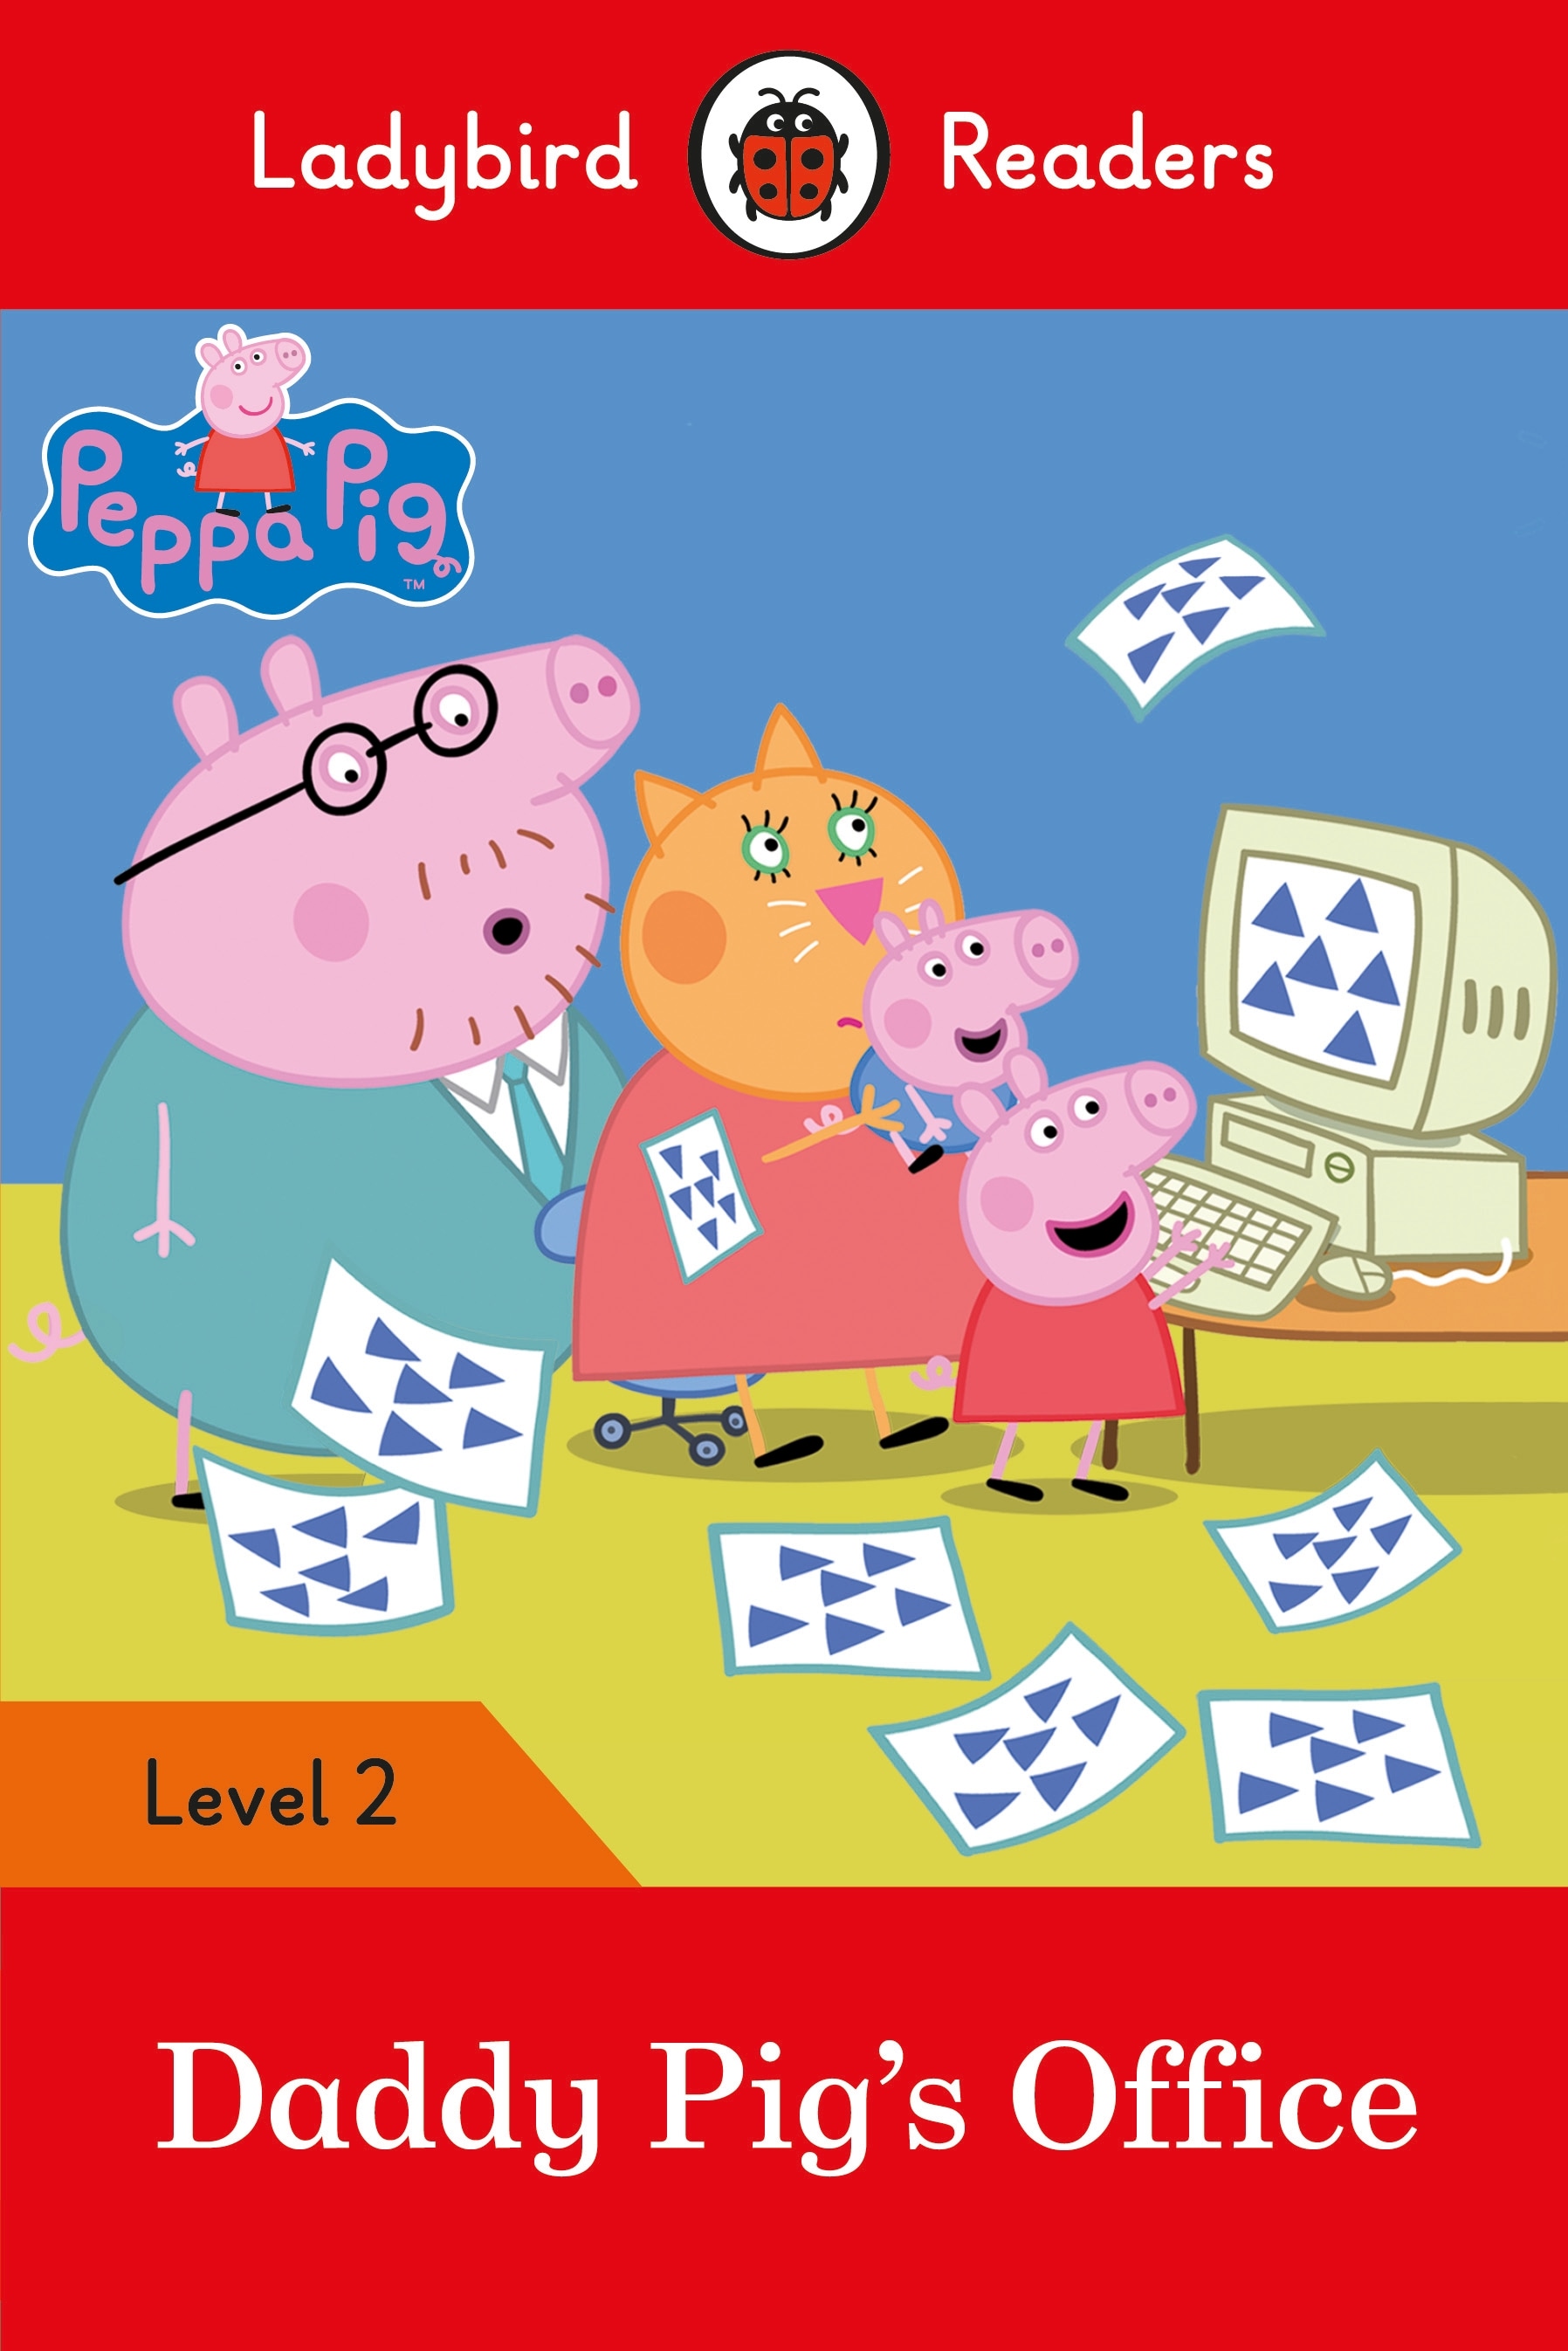 Peppa Pig: Daddy Pig's Office - Ladybird Readers Level 2